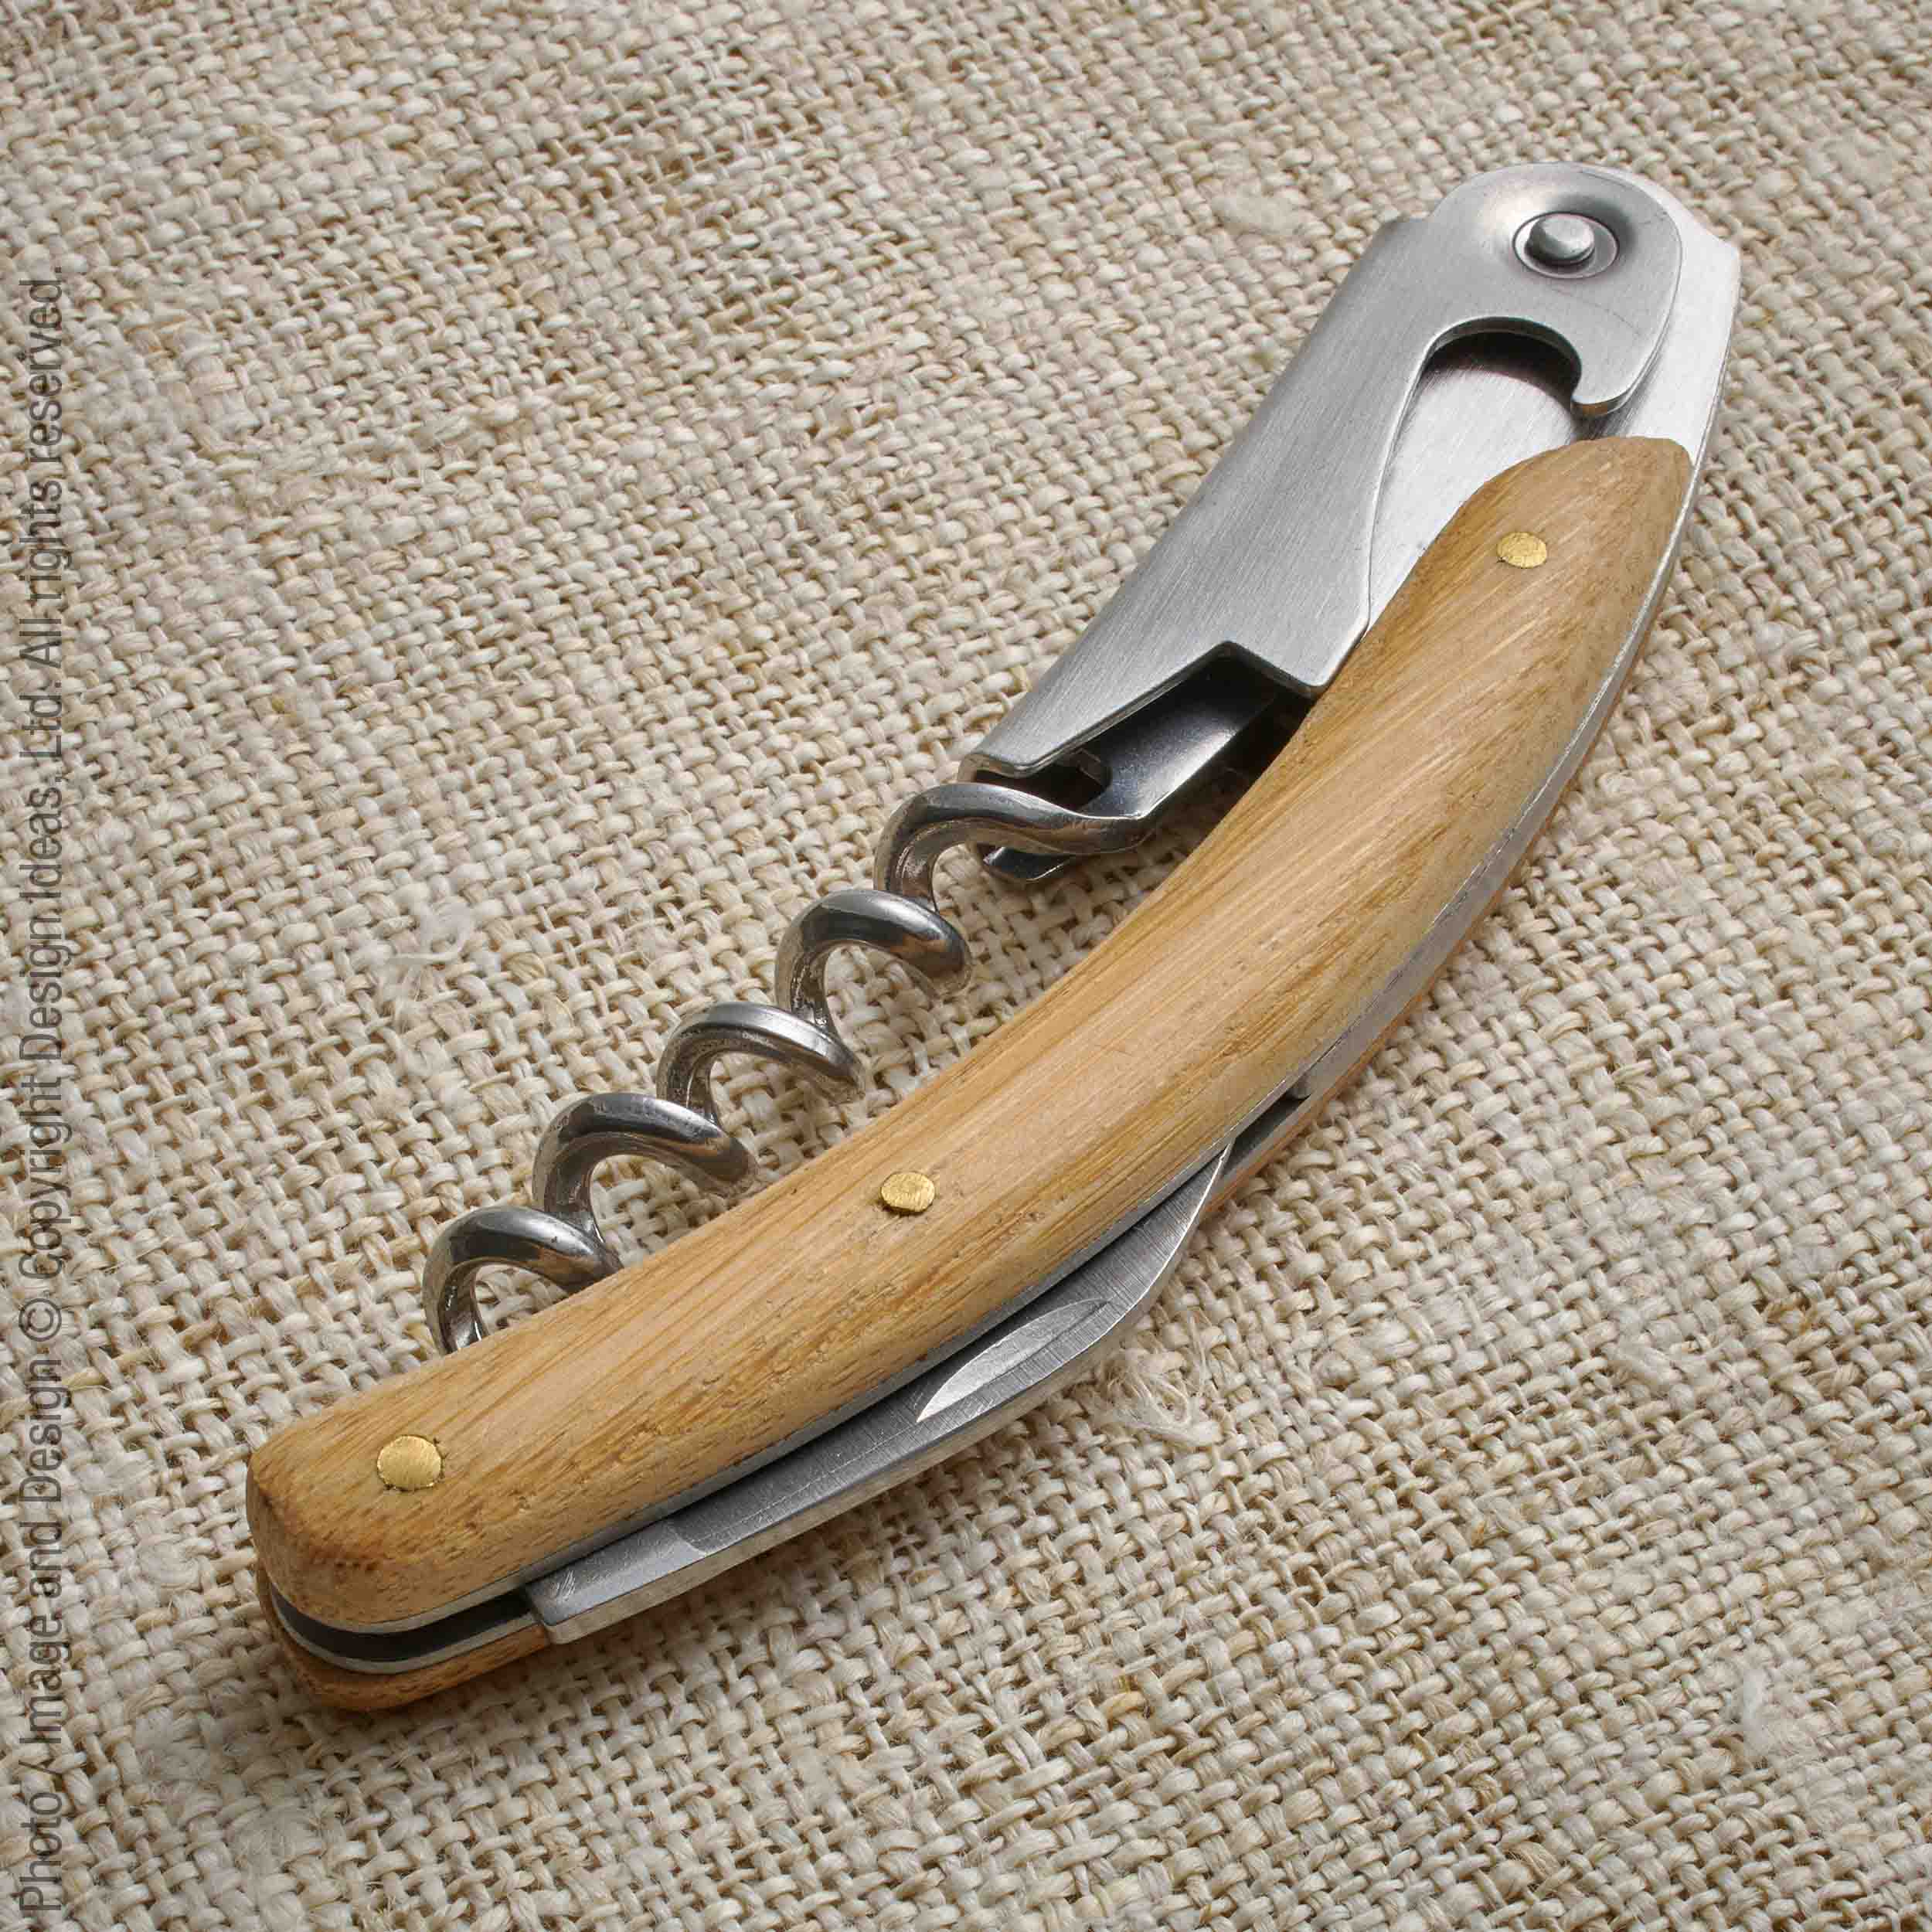 Chalais Natural Bamboo Wine Opener -   | Image  | Skillfully made with natural stainless steel/bamboo for long lasting use. These premium utensils are a member of the Chalais Collection.  Available in natural coloring. The classic tool used by professional sommeliers. Made of Stainless Steel. Packaged in a black gift box.   . 